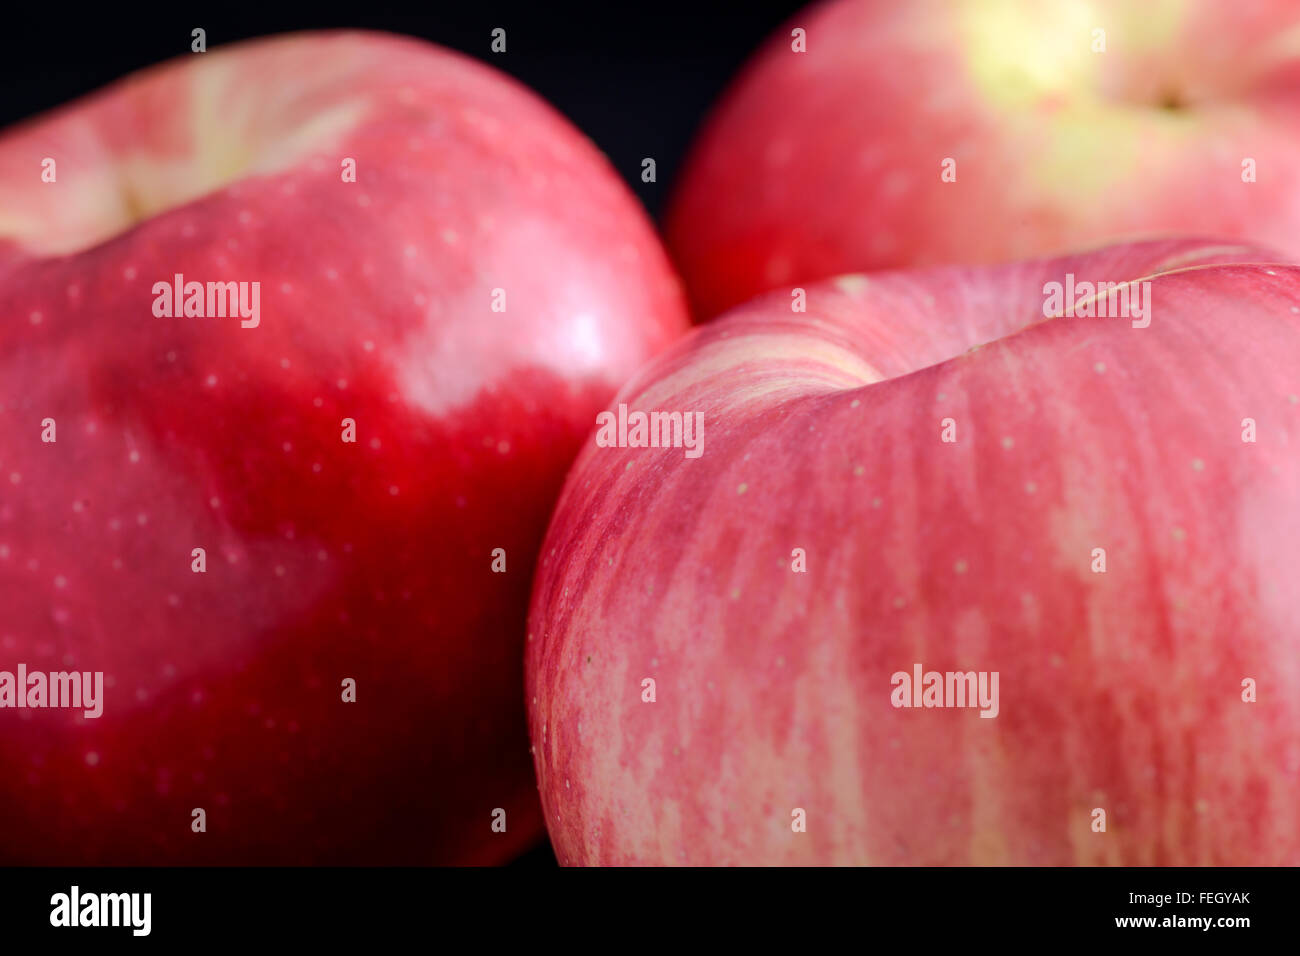 Red apples with droplets Stock Photo